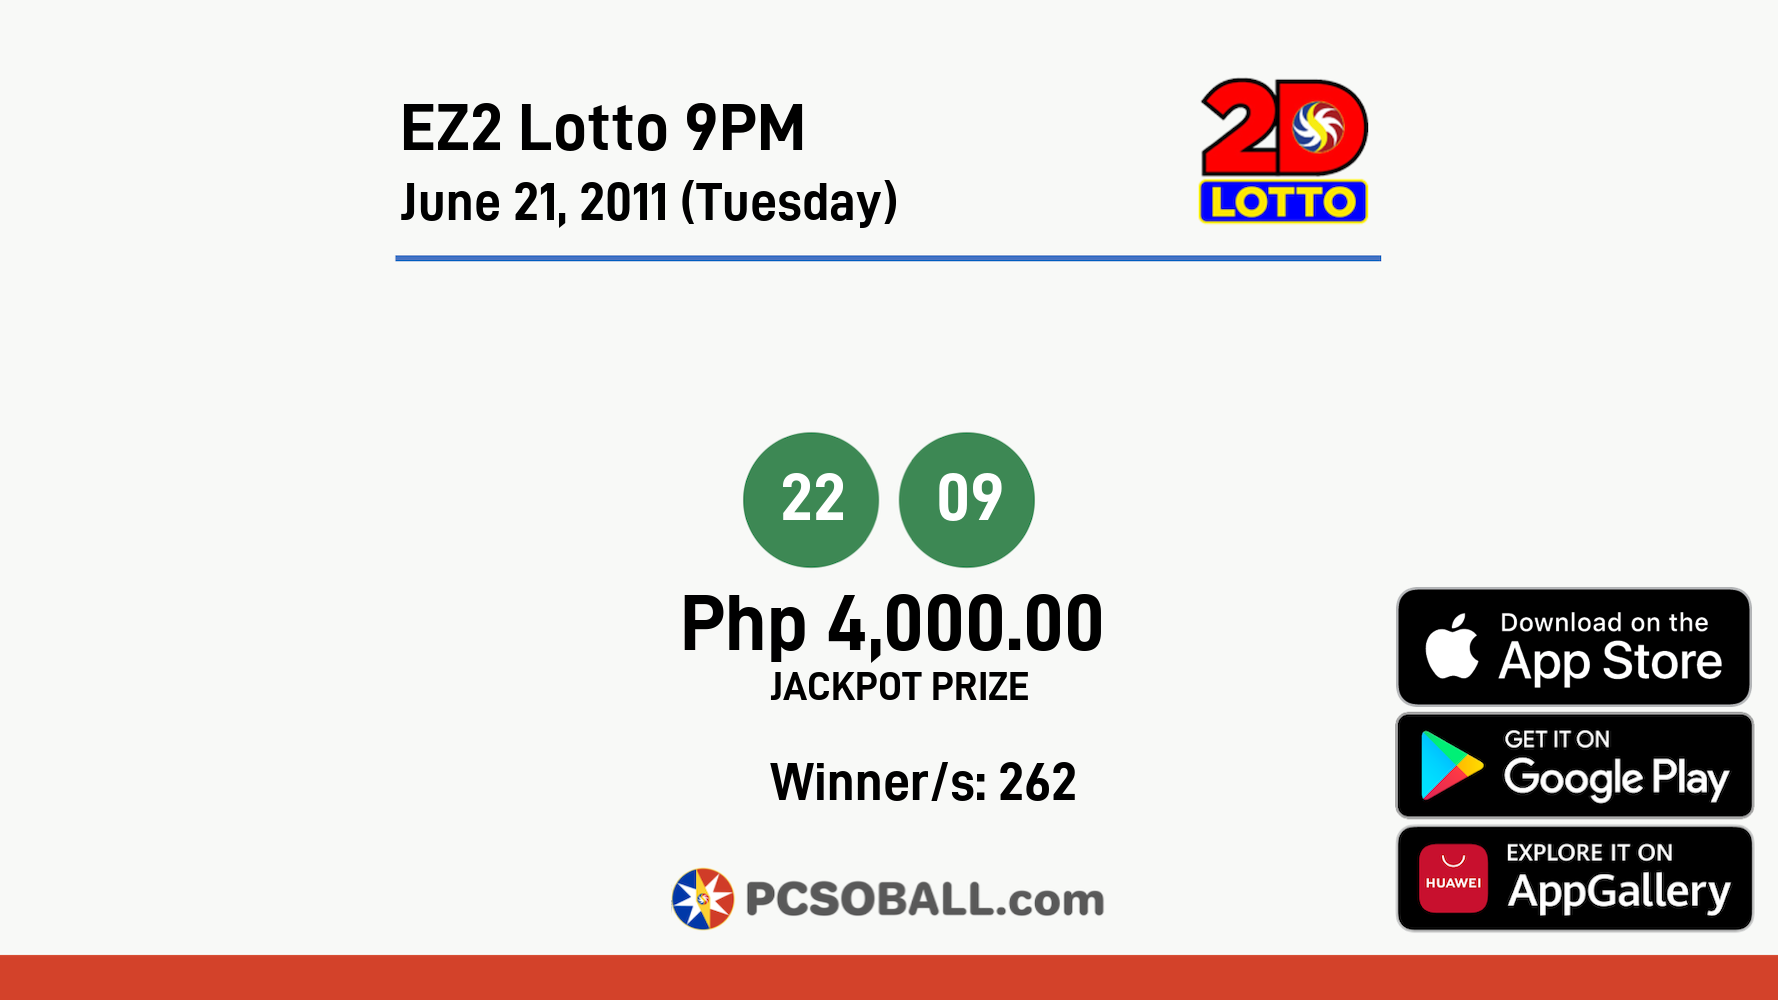 EZ2 Lotto 9PM June 21, 2011 (Tuesday) Result